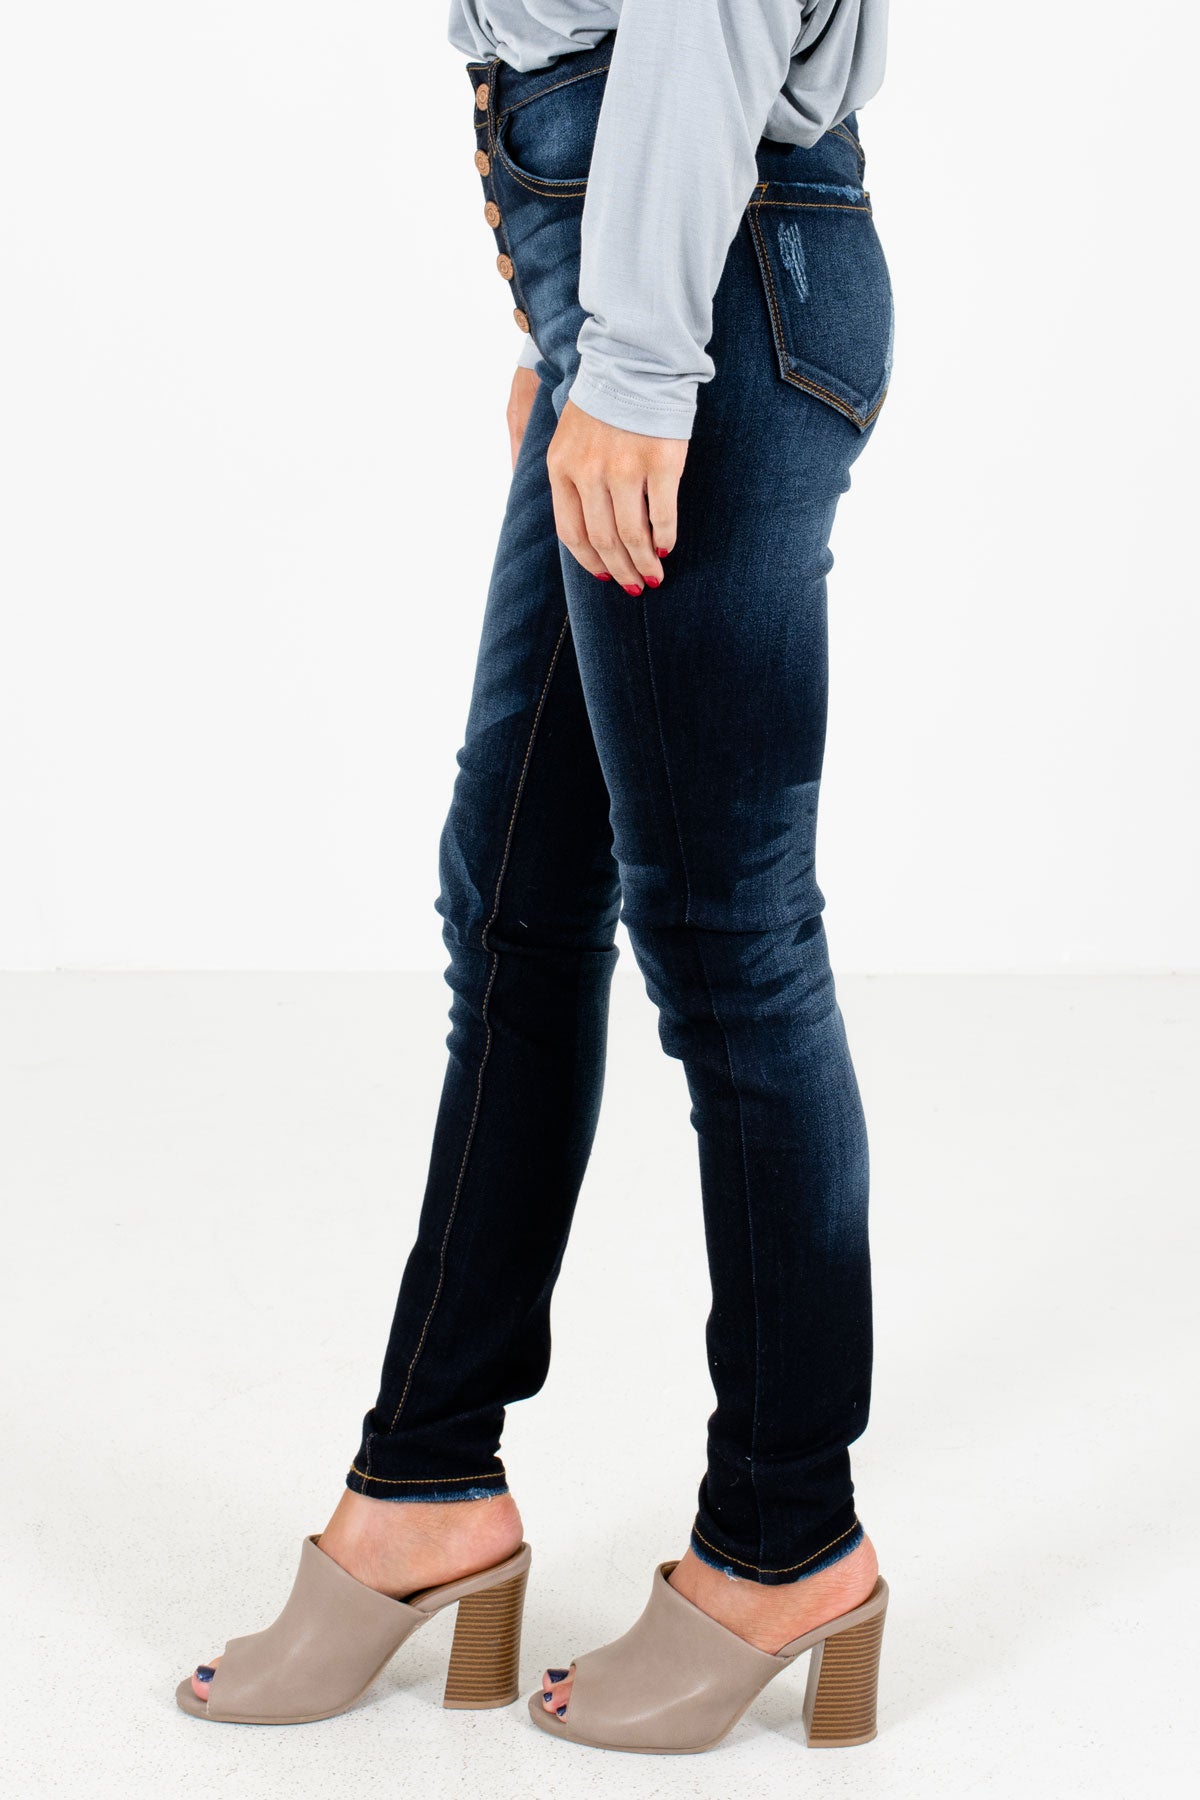 Dark Wash Blue Boutique KanCan Skinny Jeans with Pockets for Women